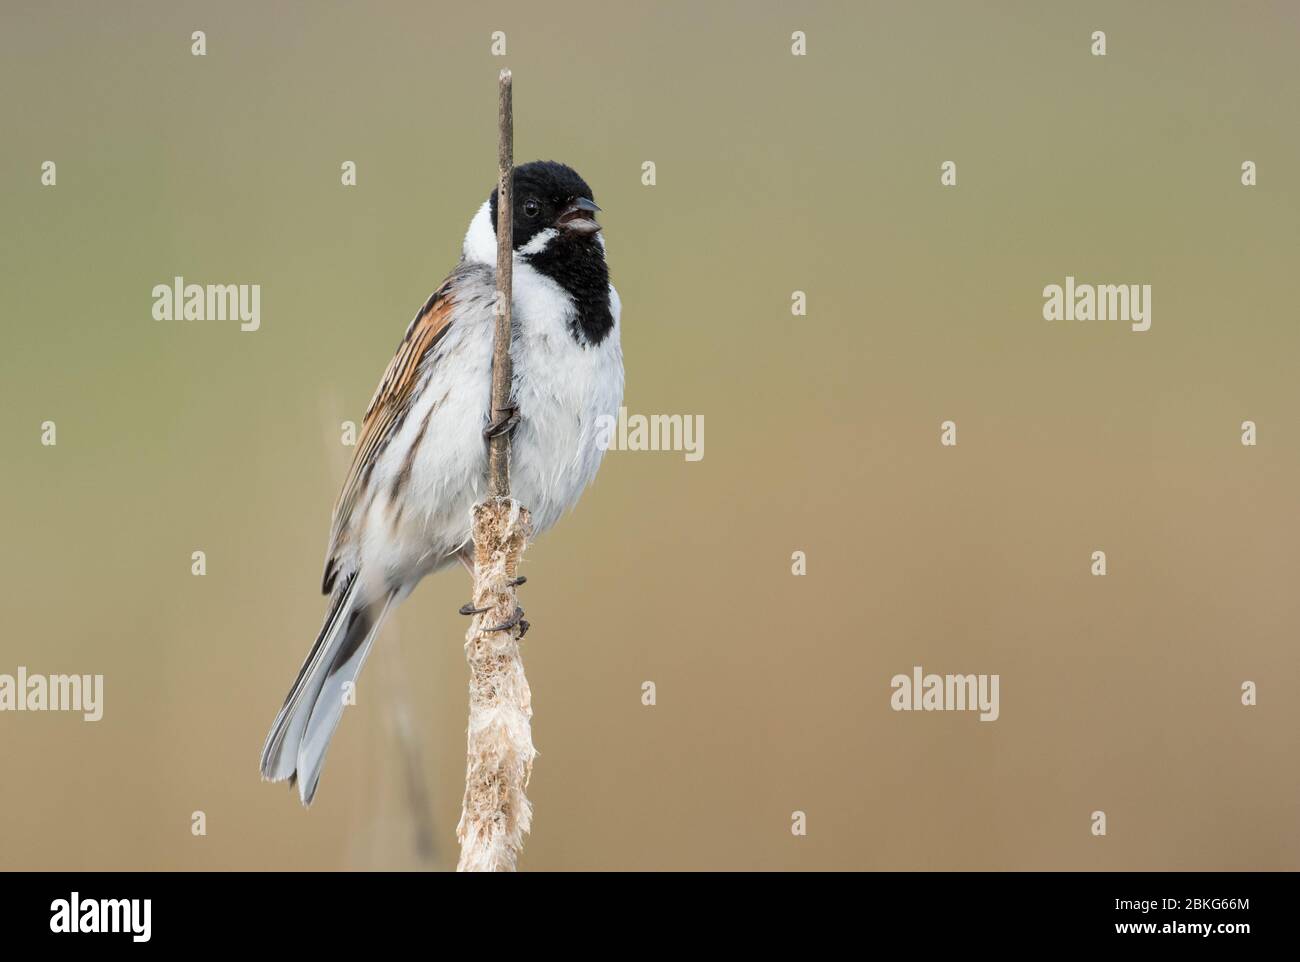 A male Reed Bunting (Emberiza Schoeniclus) in breeding plumage perched on a reed stem with a clean background. Taken at a small pond in Wiltshire. Stock Photo